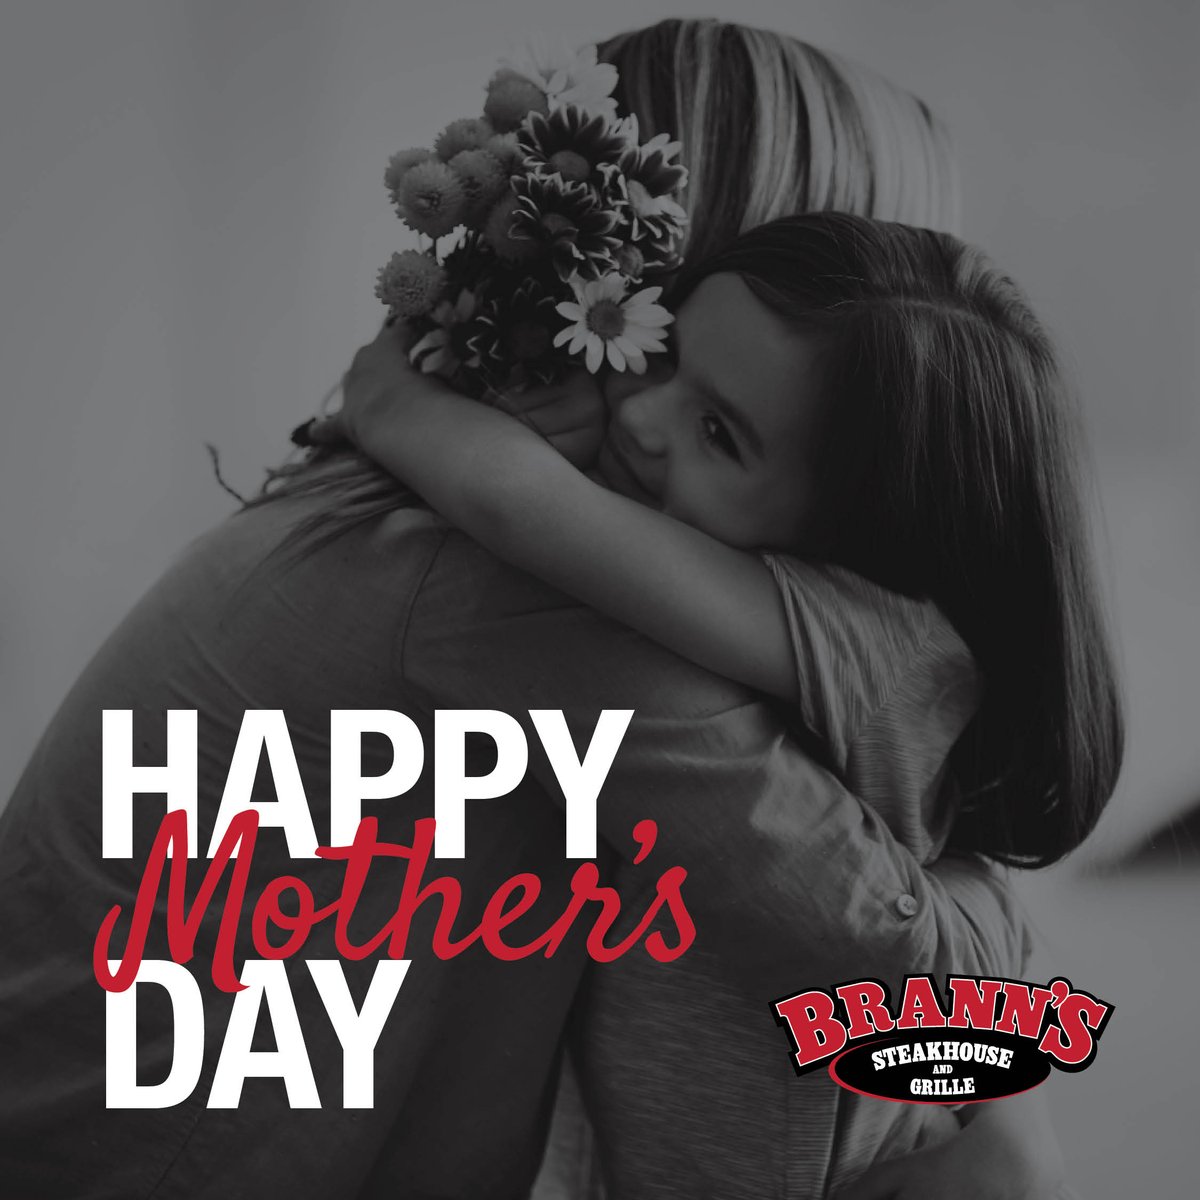 Happy Mother's Day to all the wonderful mom's out there. We hope your day is well spent with the ones you love.